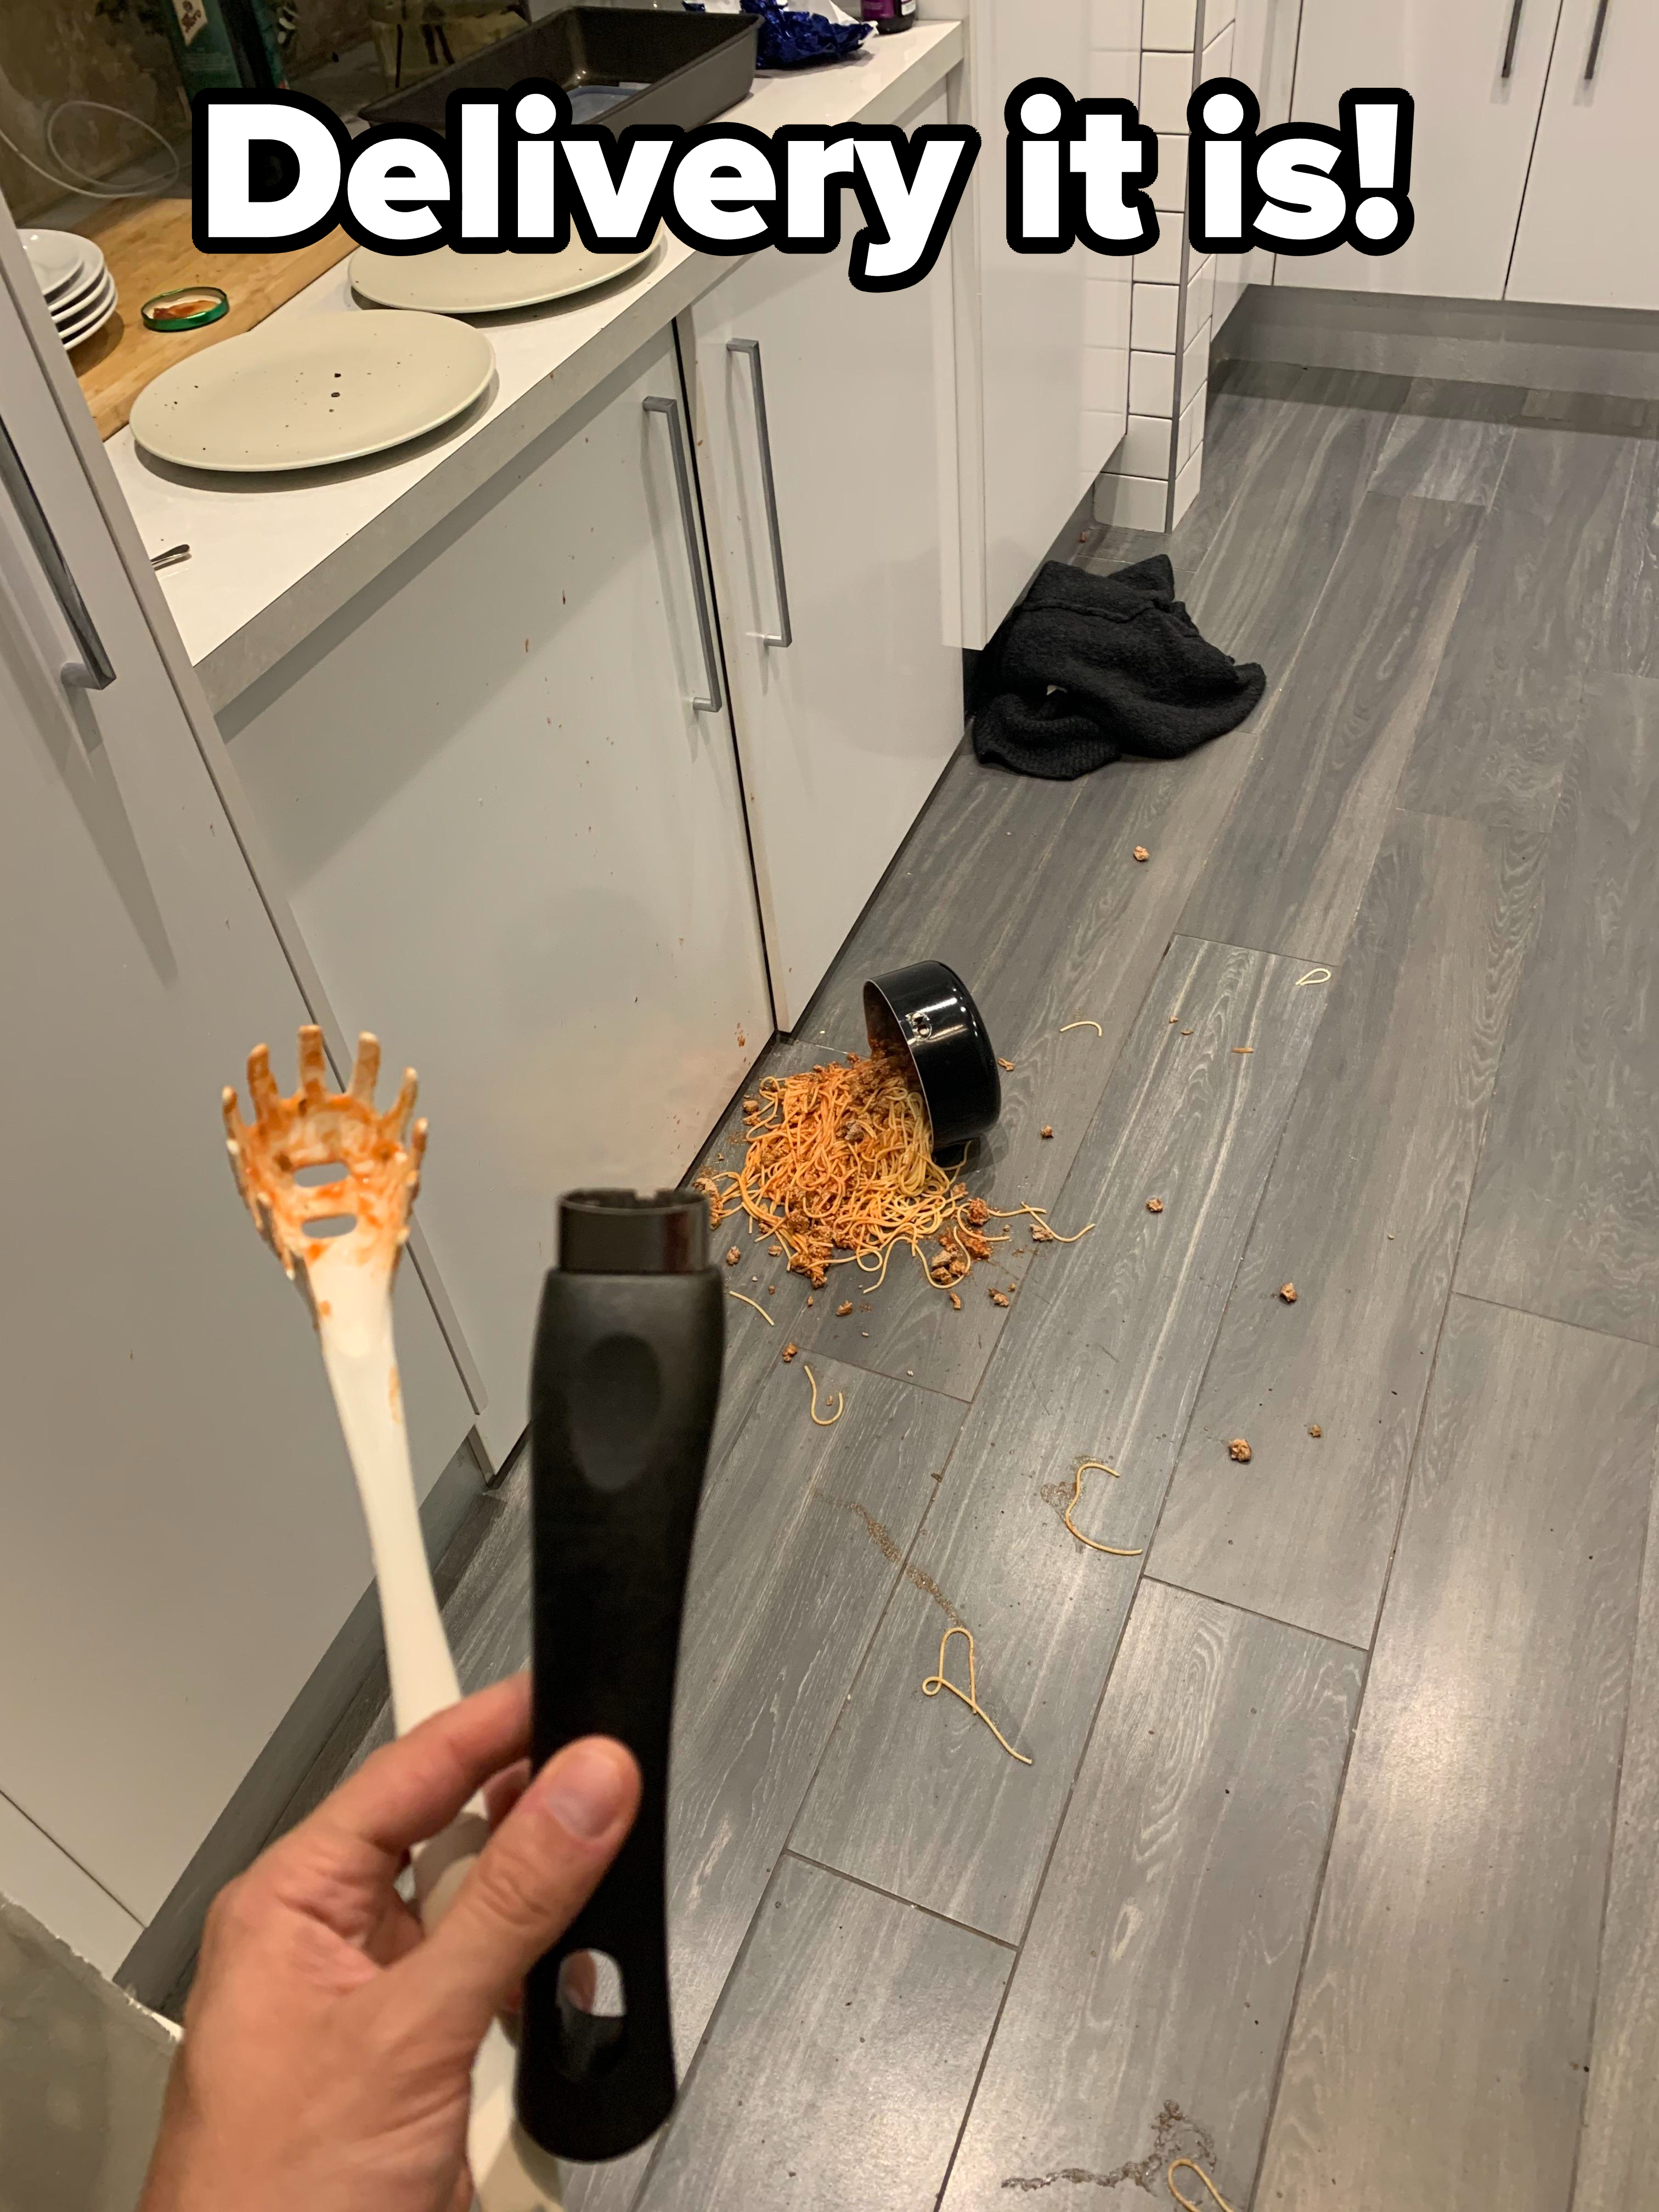 Handle of a pot containing spaghetti breaks, with the spaghetti all over the kitchen floor, with caption &quot;Delivery it is!&quot;